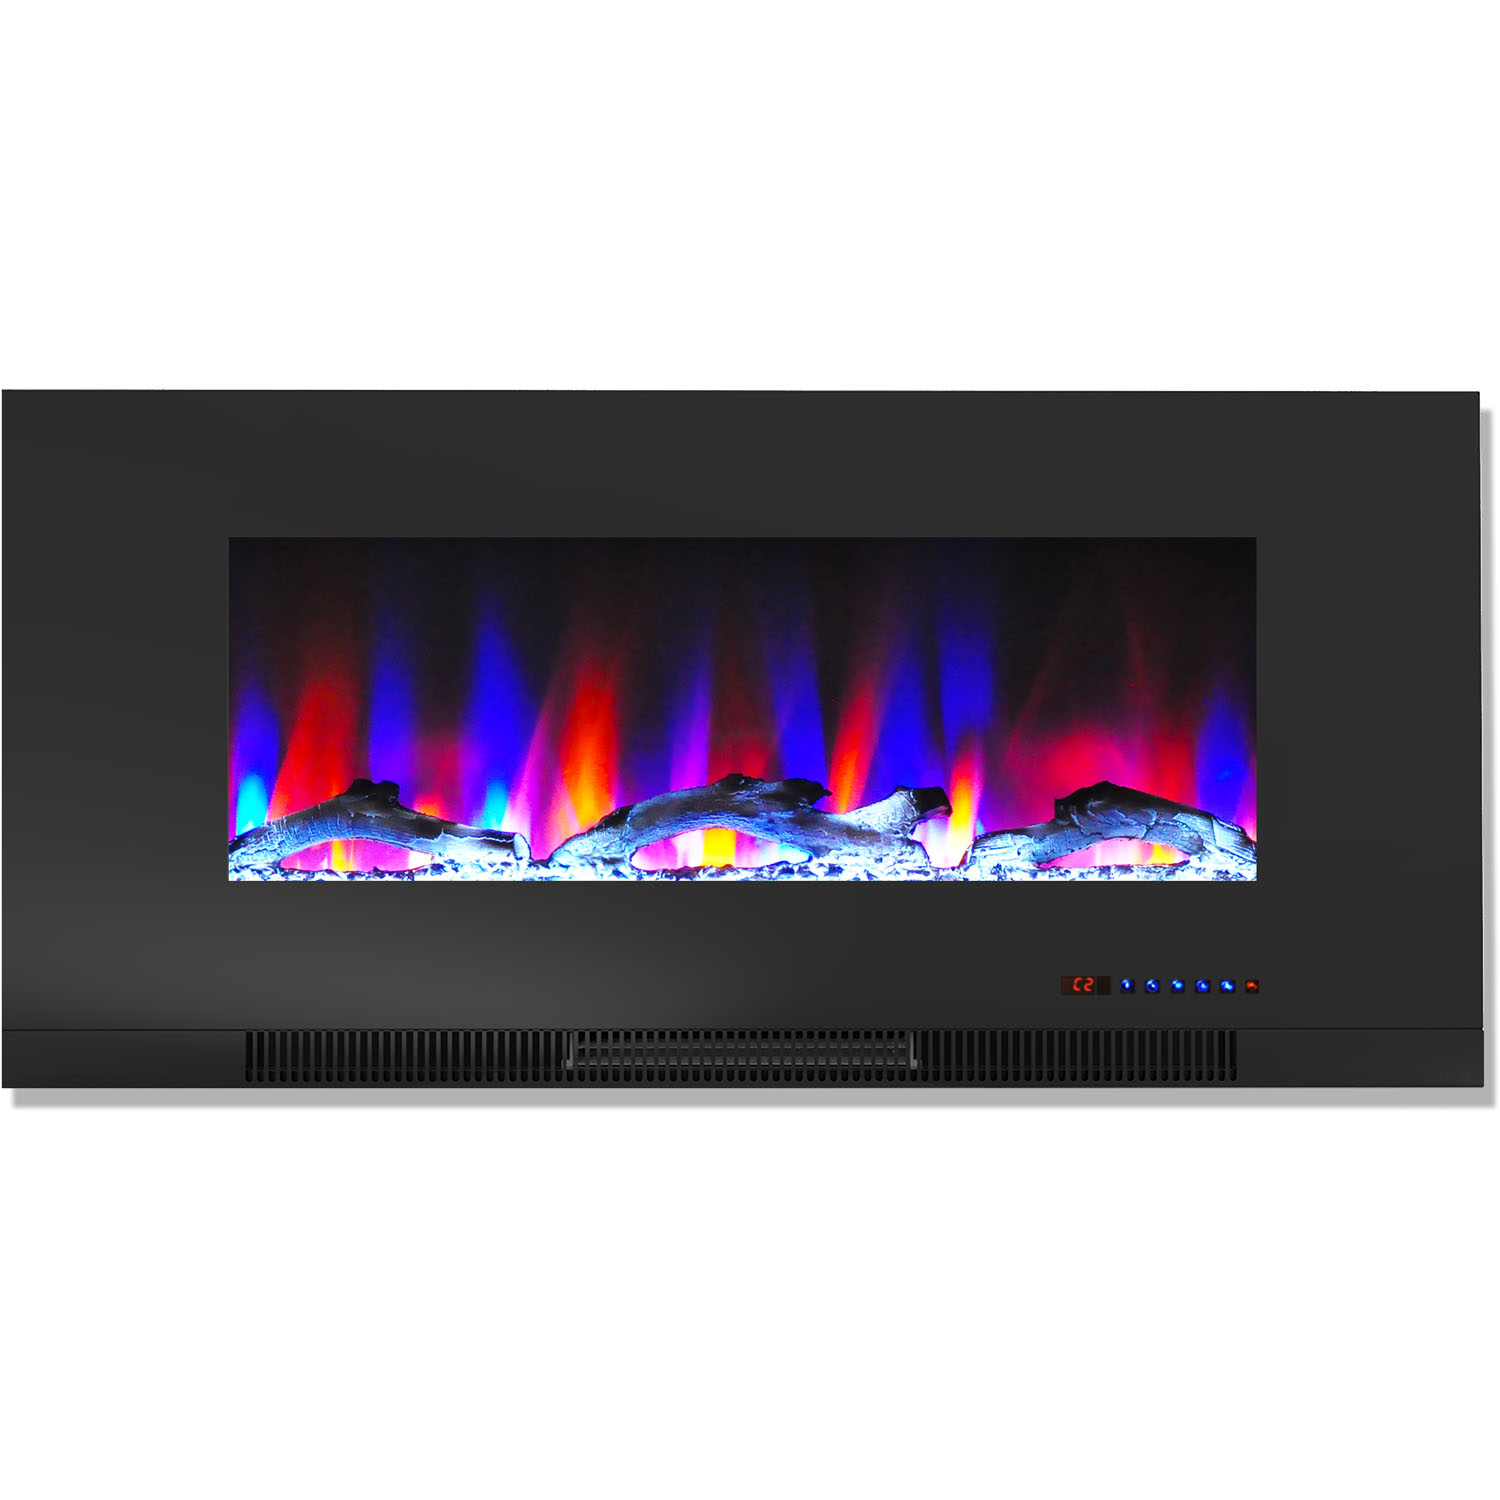 Cambridge 42" Wall-Mount Electric Fireplace Heater with Multi-Color LED Flames and Driftwood Log Display - image 5 of 14